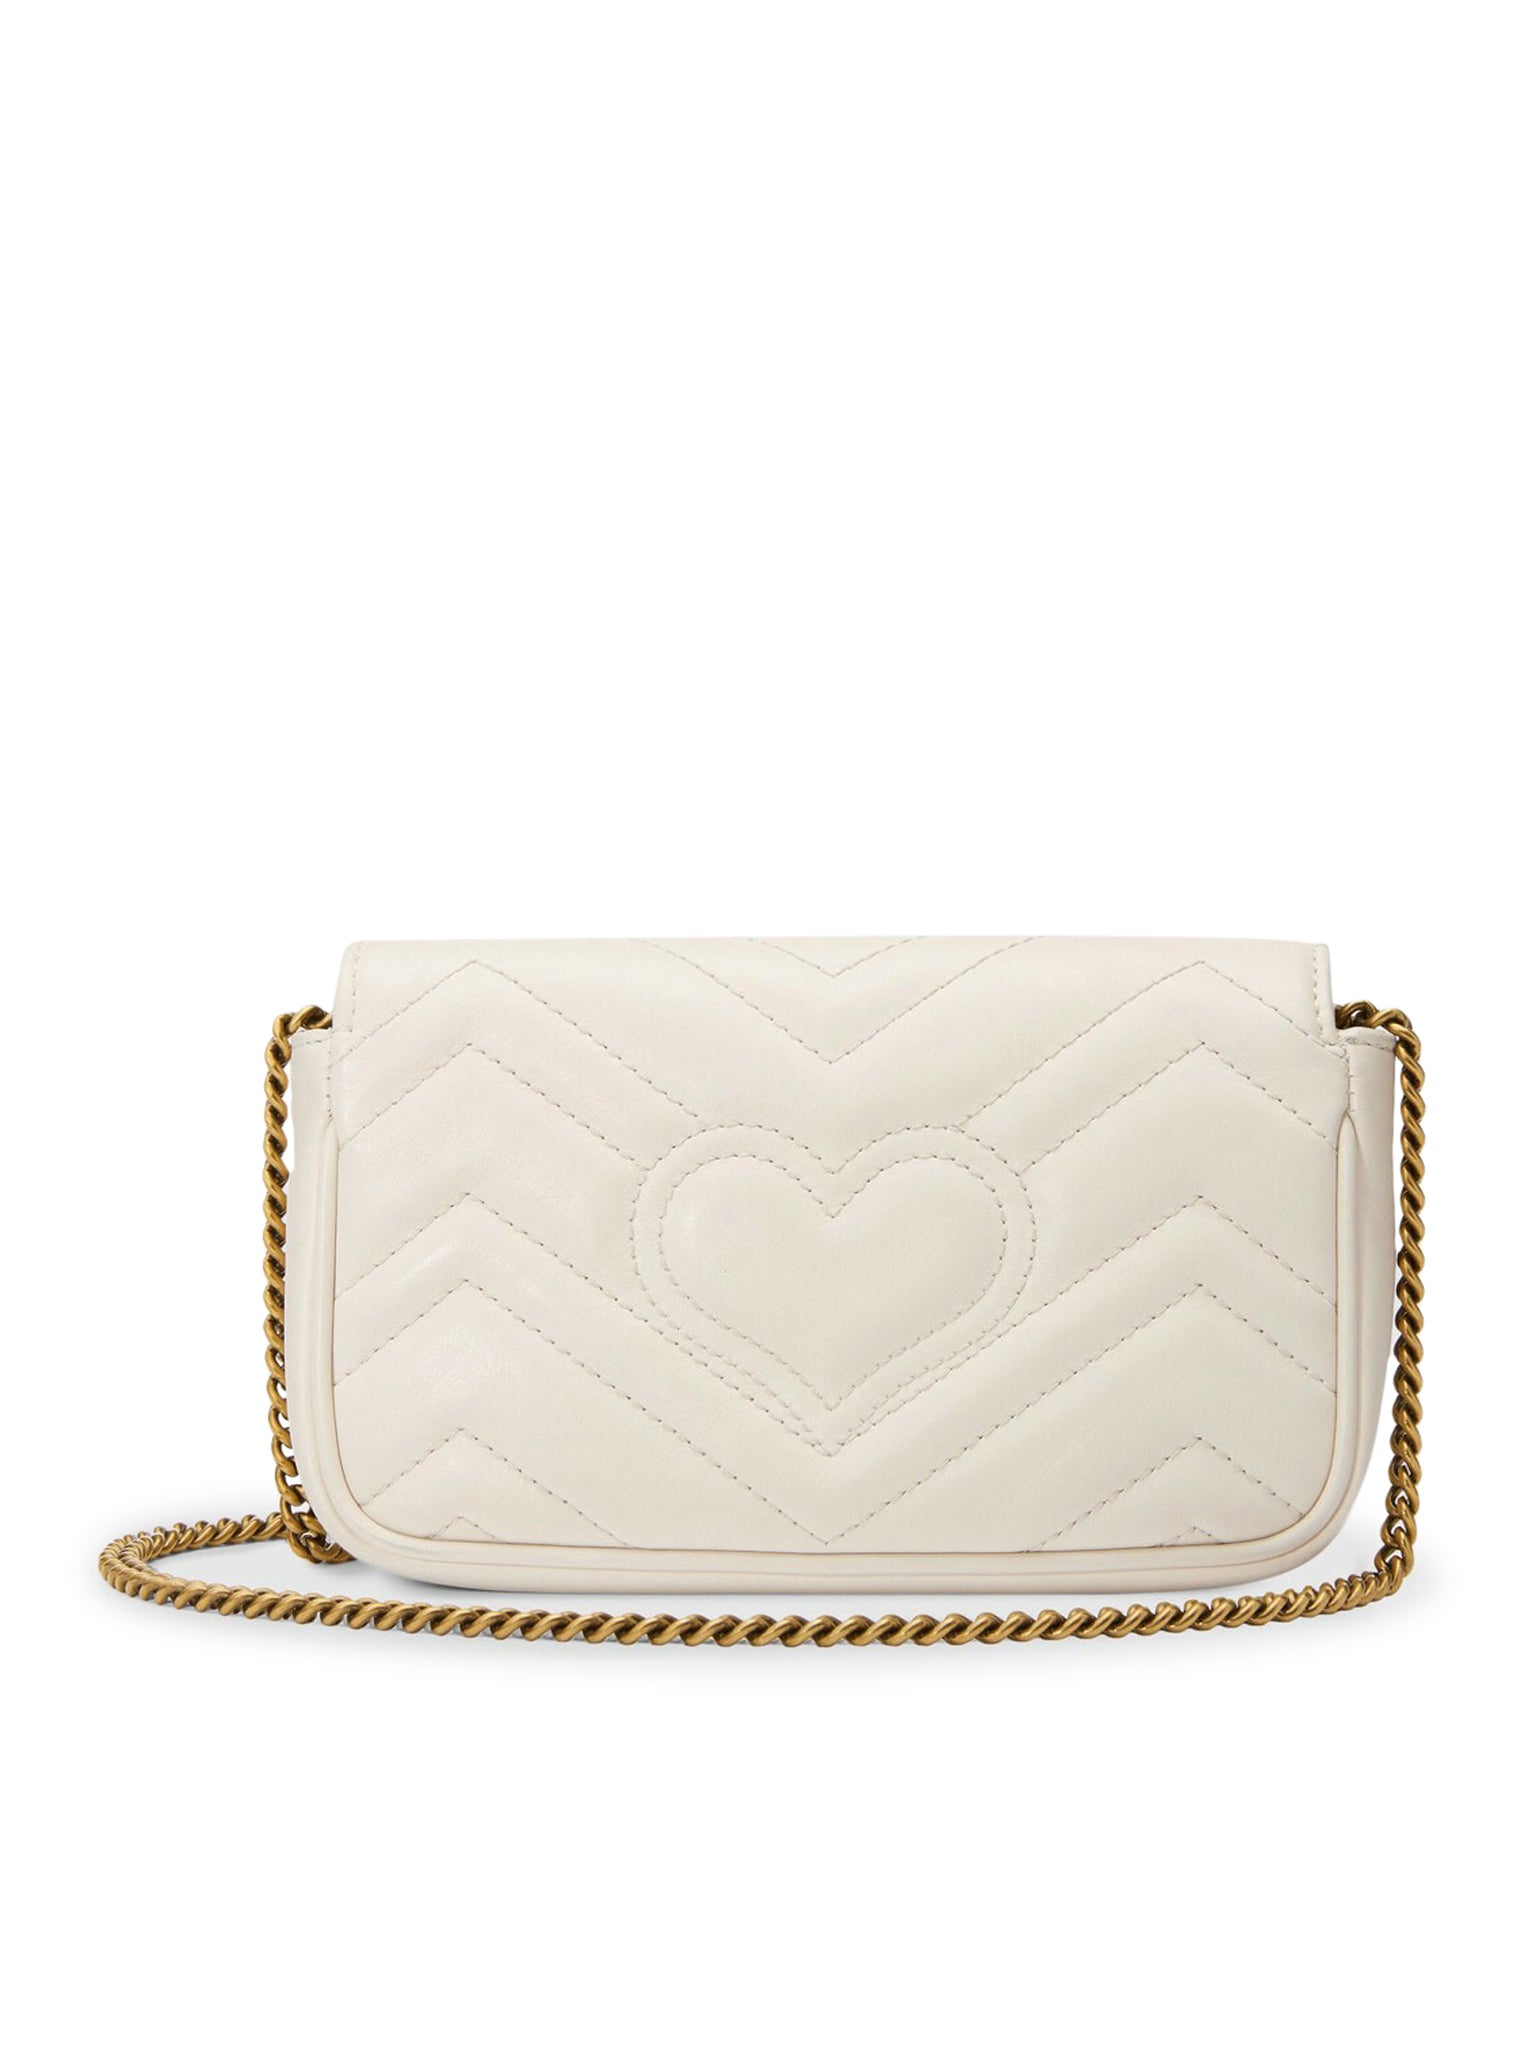 GG MARMONT MINI BAG IN QUILTED LEATHER